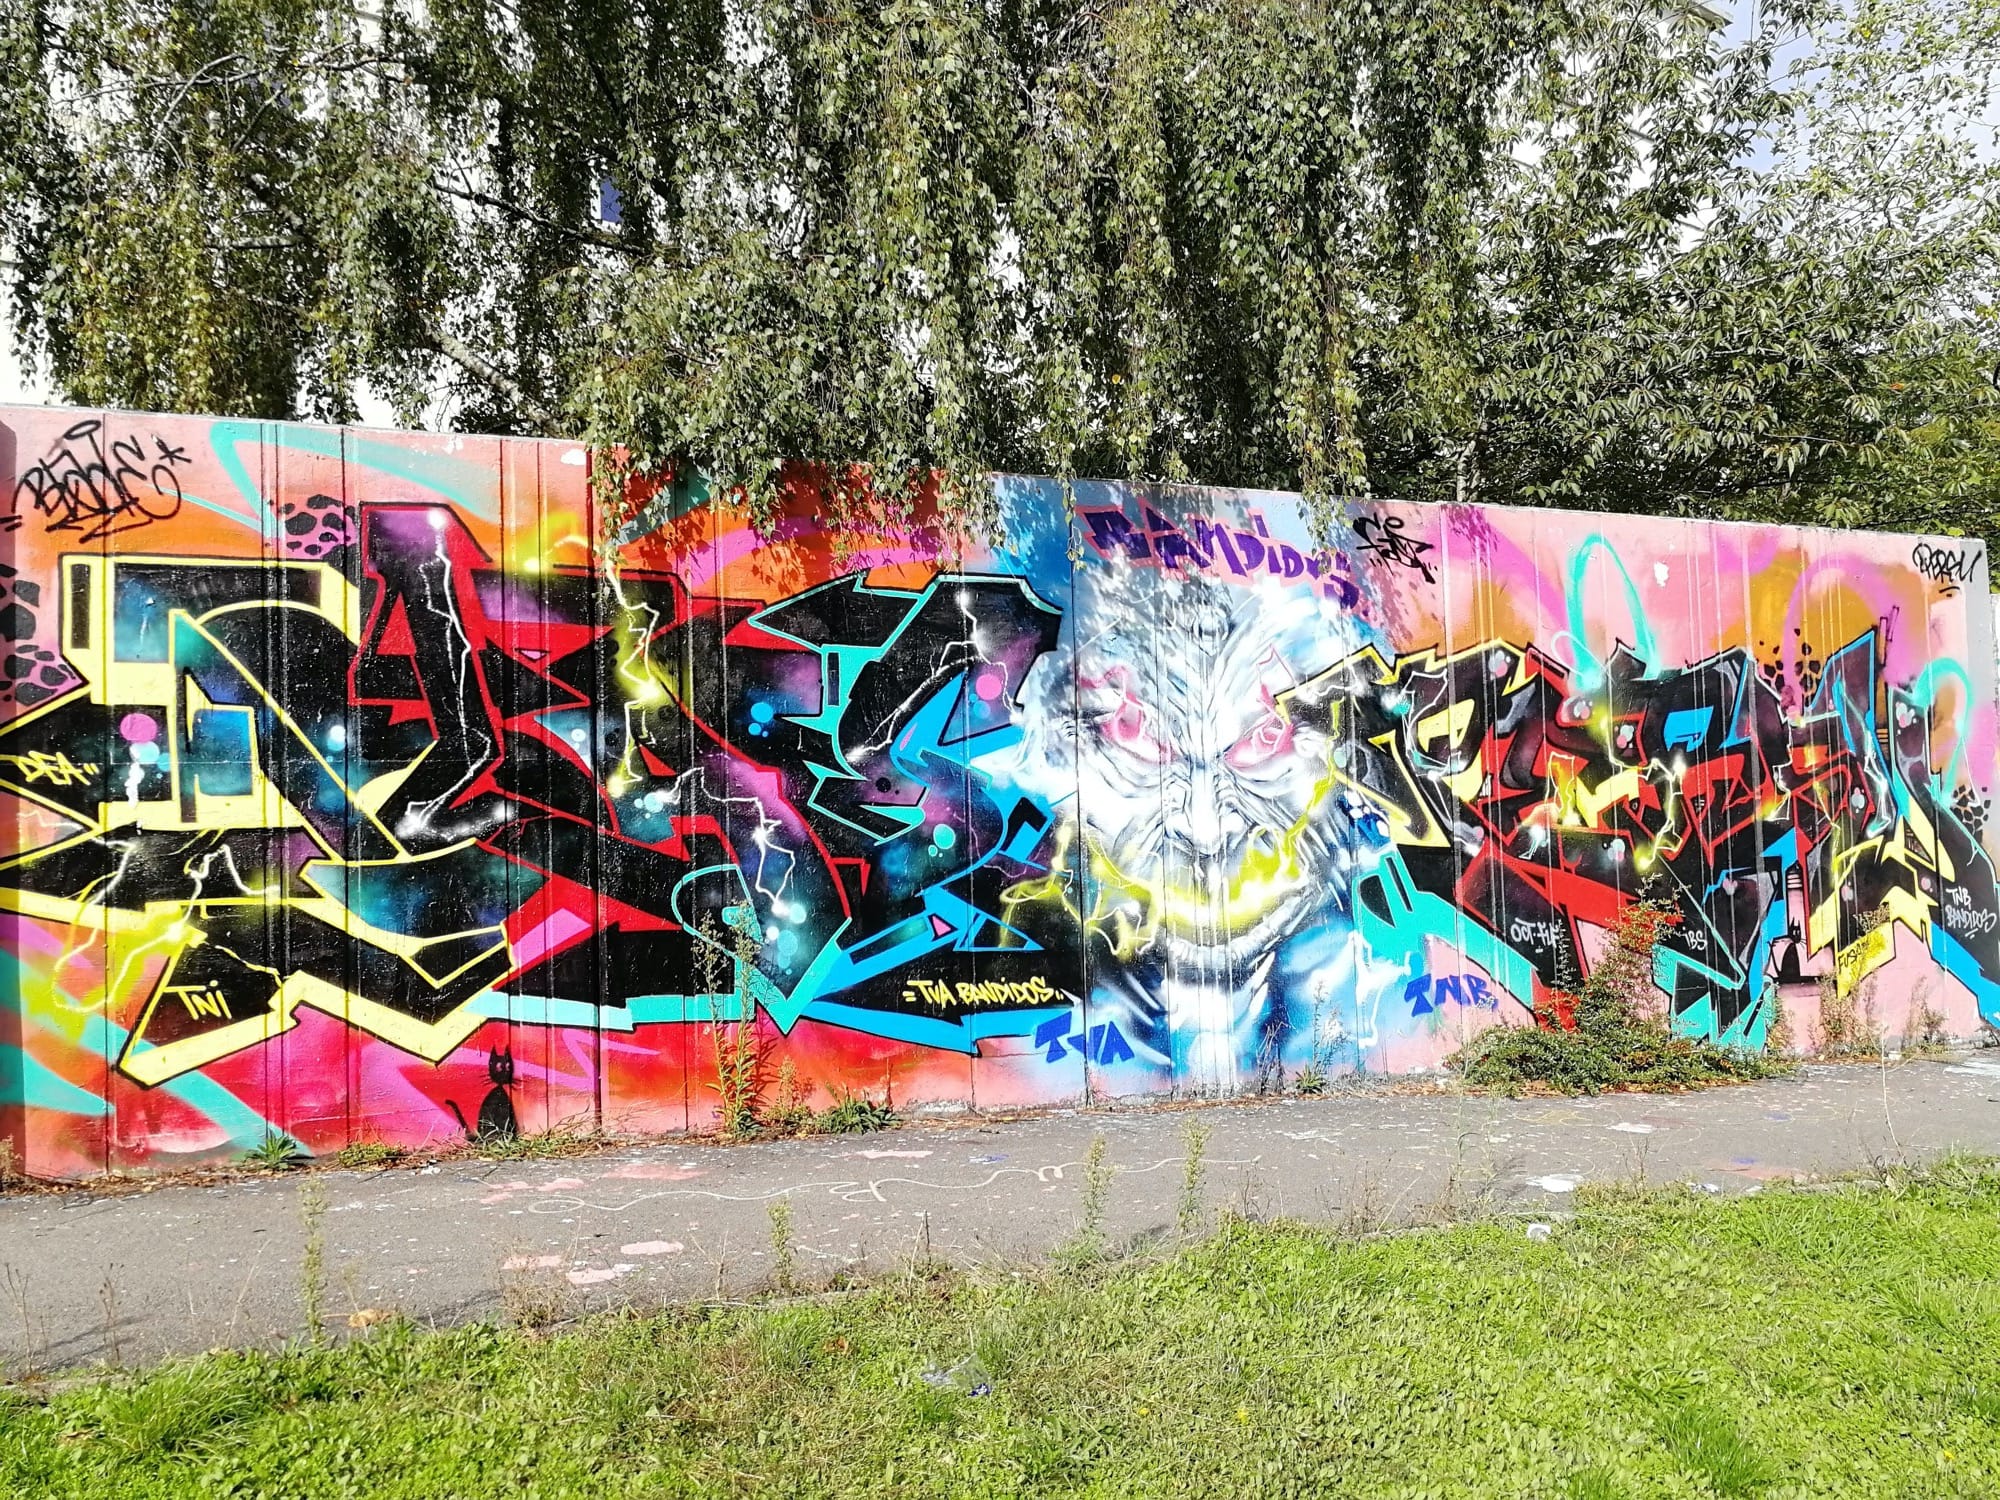 Graffiti 4488  by the artist Persu captured by Rabot in Nantes France